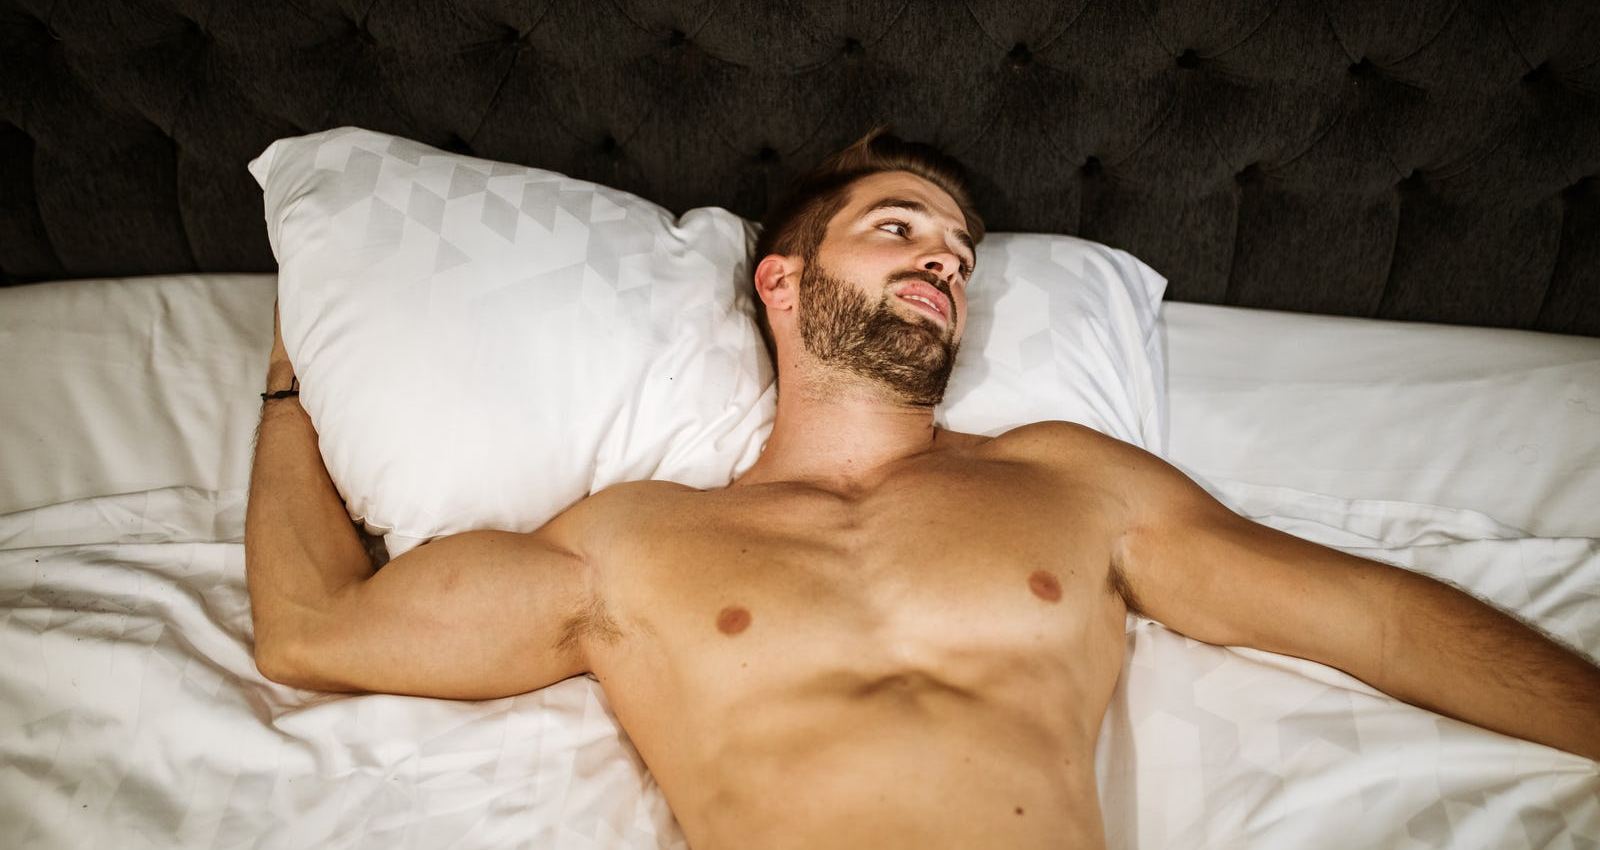 The Men's guide to becoming Multi-Orgasmic